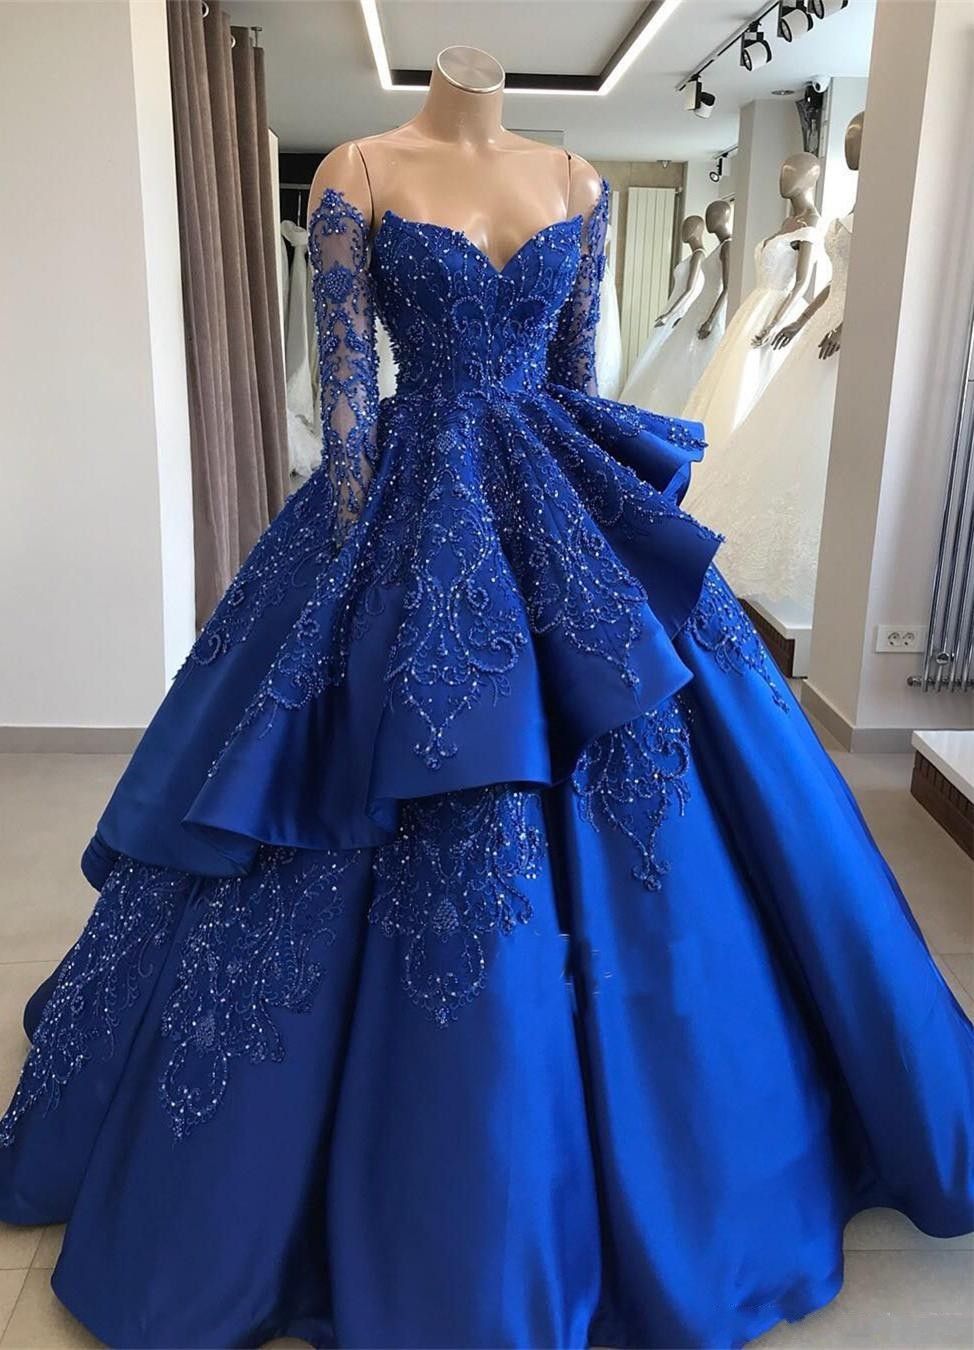 2019 Gorgeous Royal Blue Lace Prom Evening Dresses Long Sleeves Sheer ...